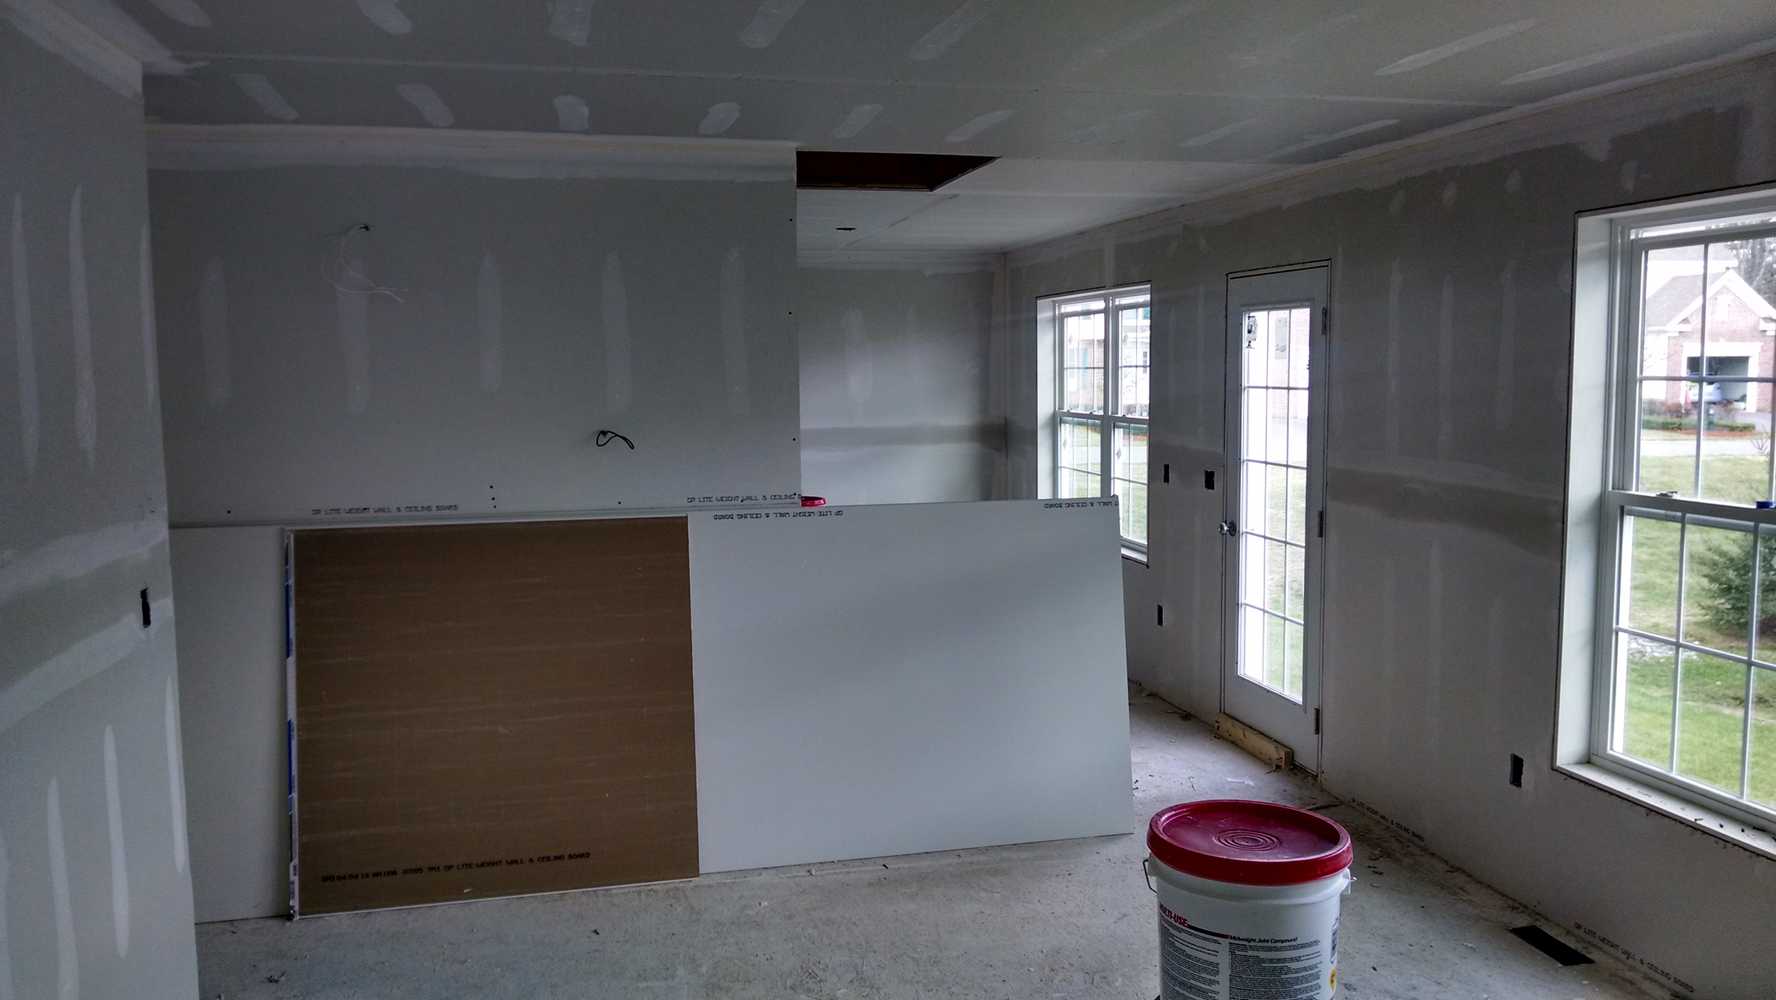 Photo(s) from Score Construction Services LLC